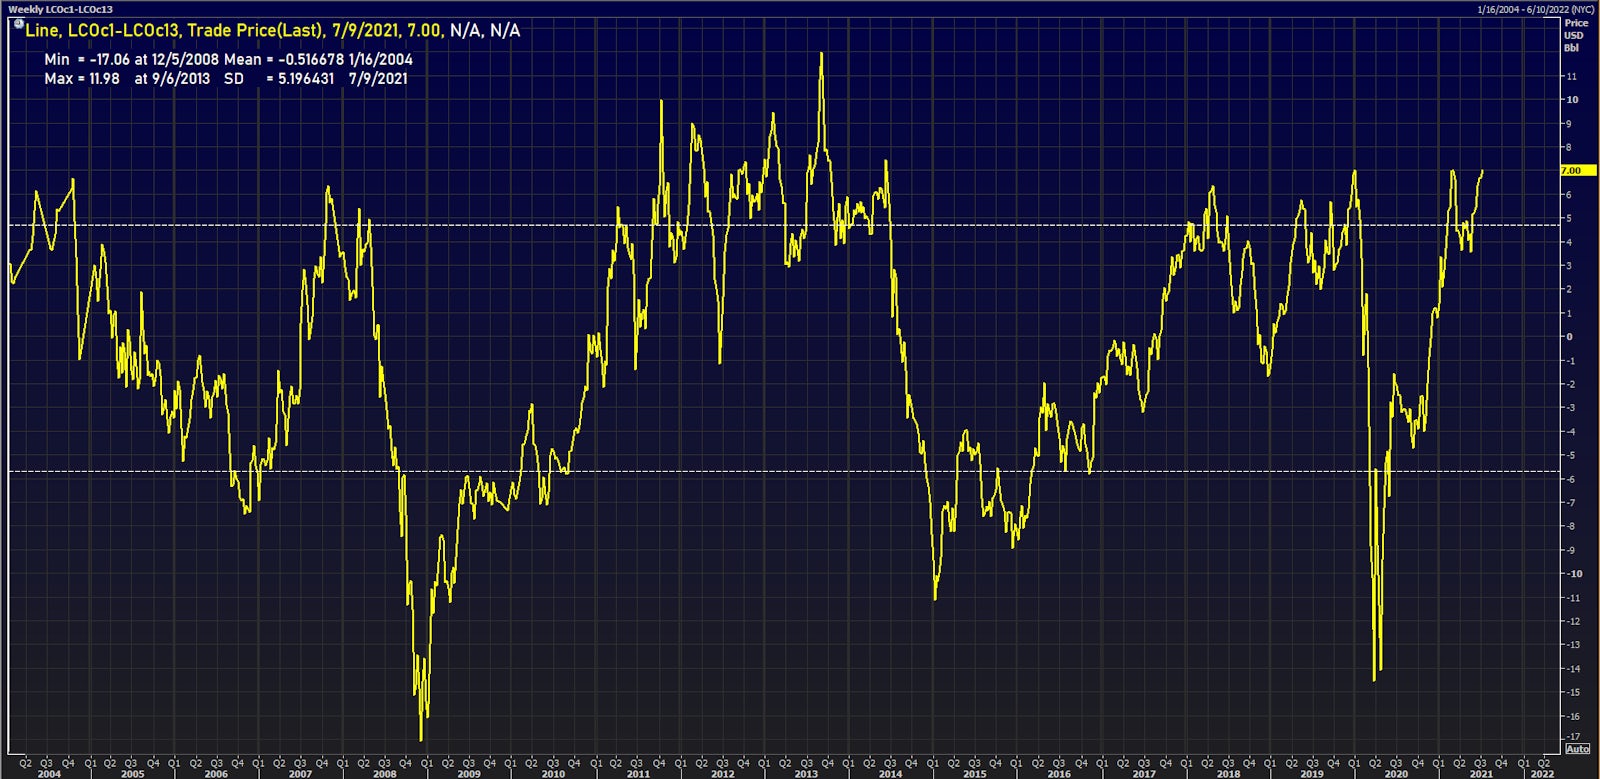 Brent Crude 1-Year Calendar Spread Showing Deepening Backwardation This Week | Source: Refinitiv